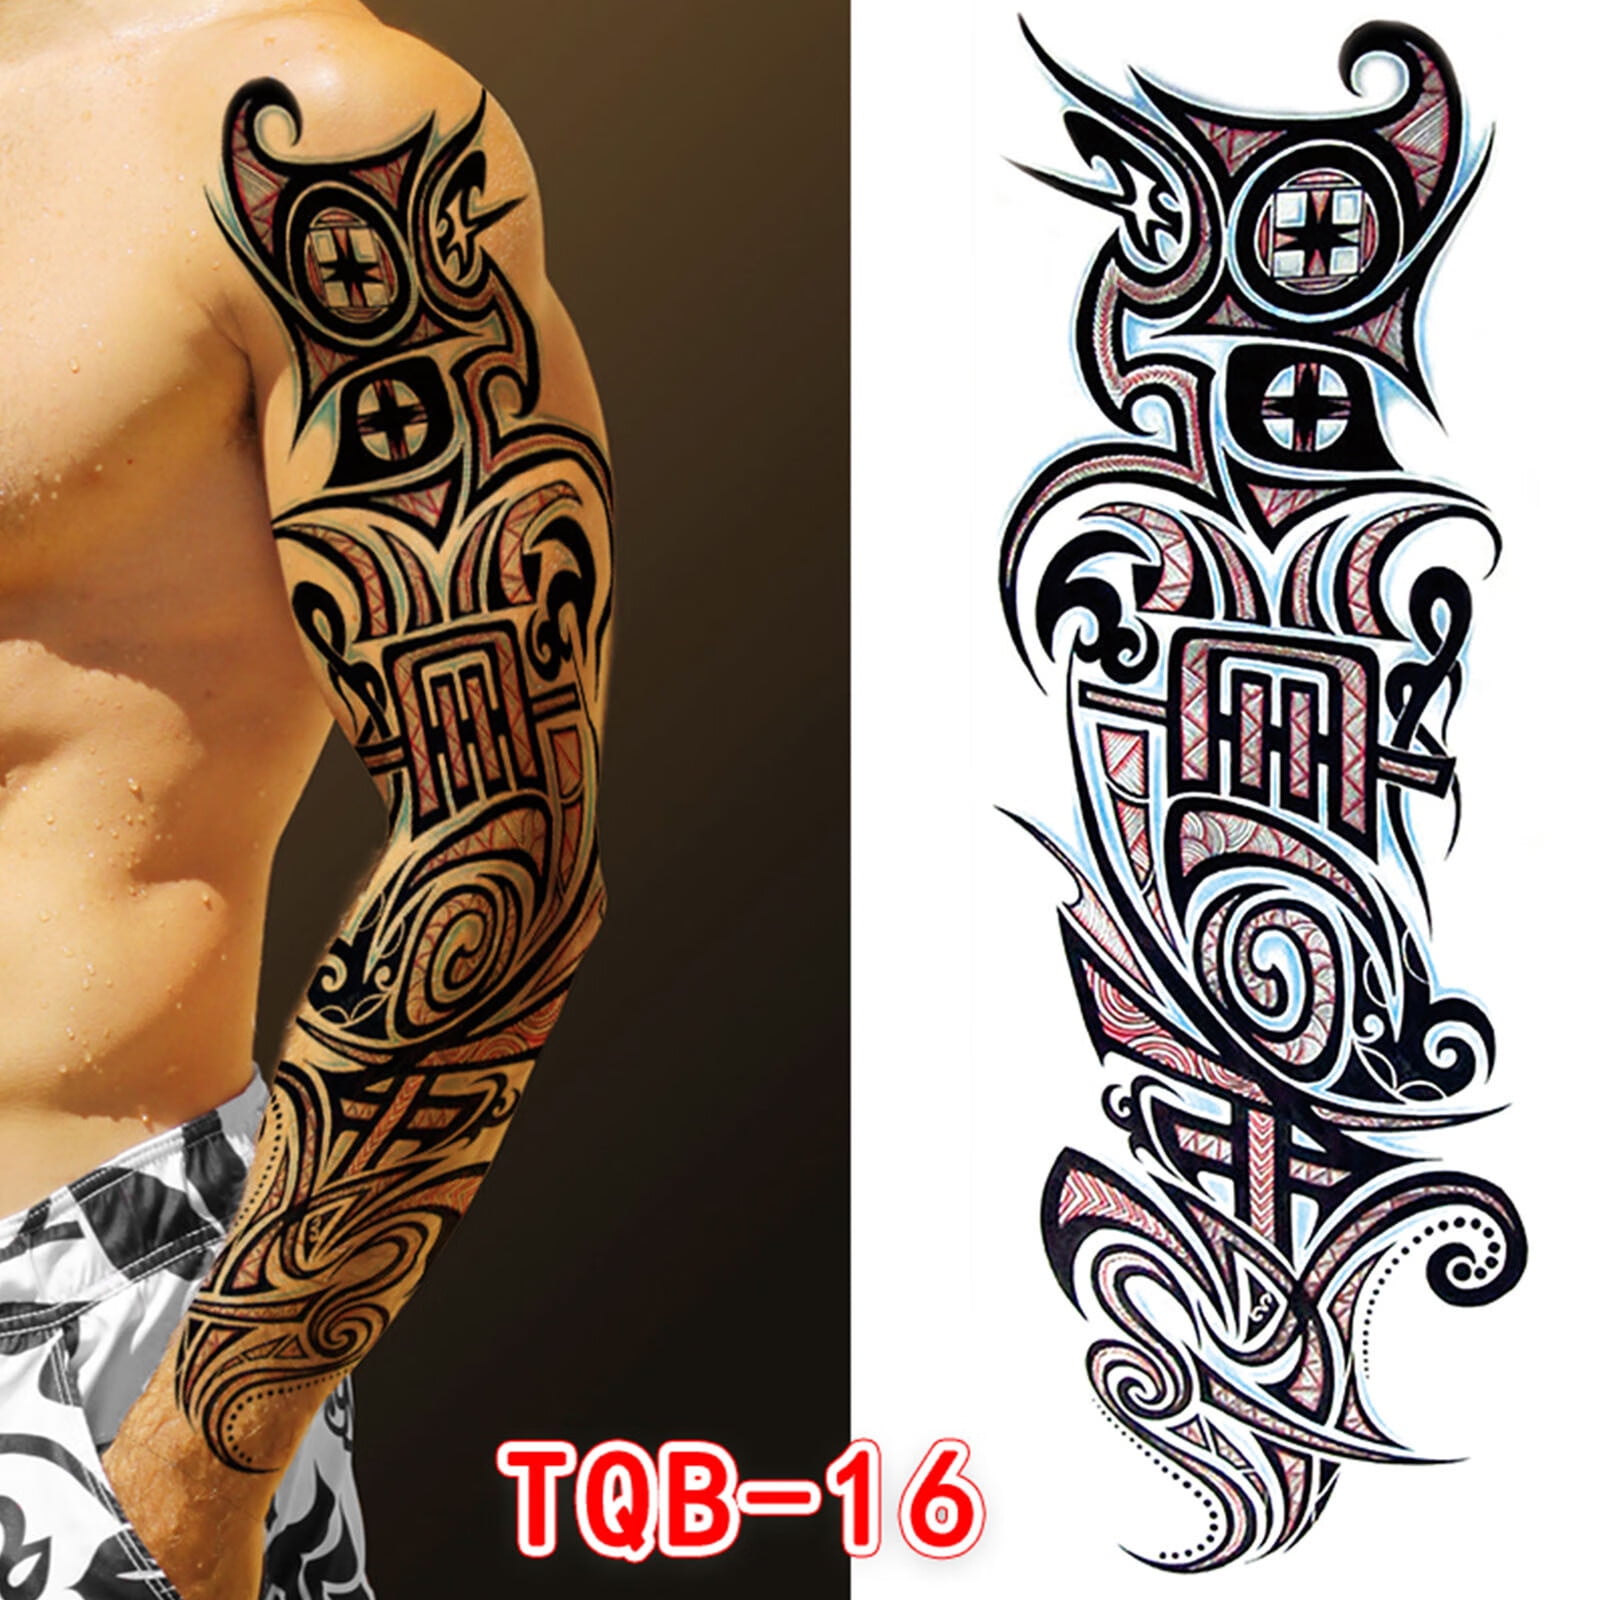 3D Tattoos: 125 Ideas for Turning Your Imaginative Designs Into Reality -  Wild Tattoo Art | 3d tattoos, Tattoos to cover scars, Tattoo designs men